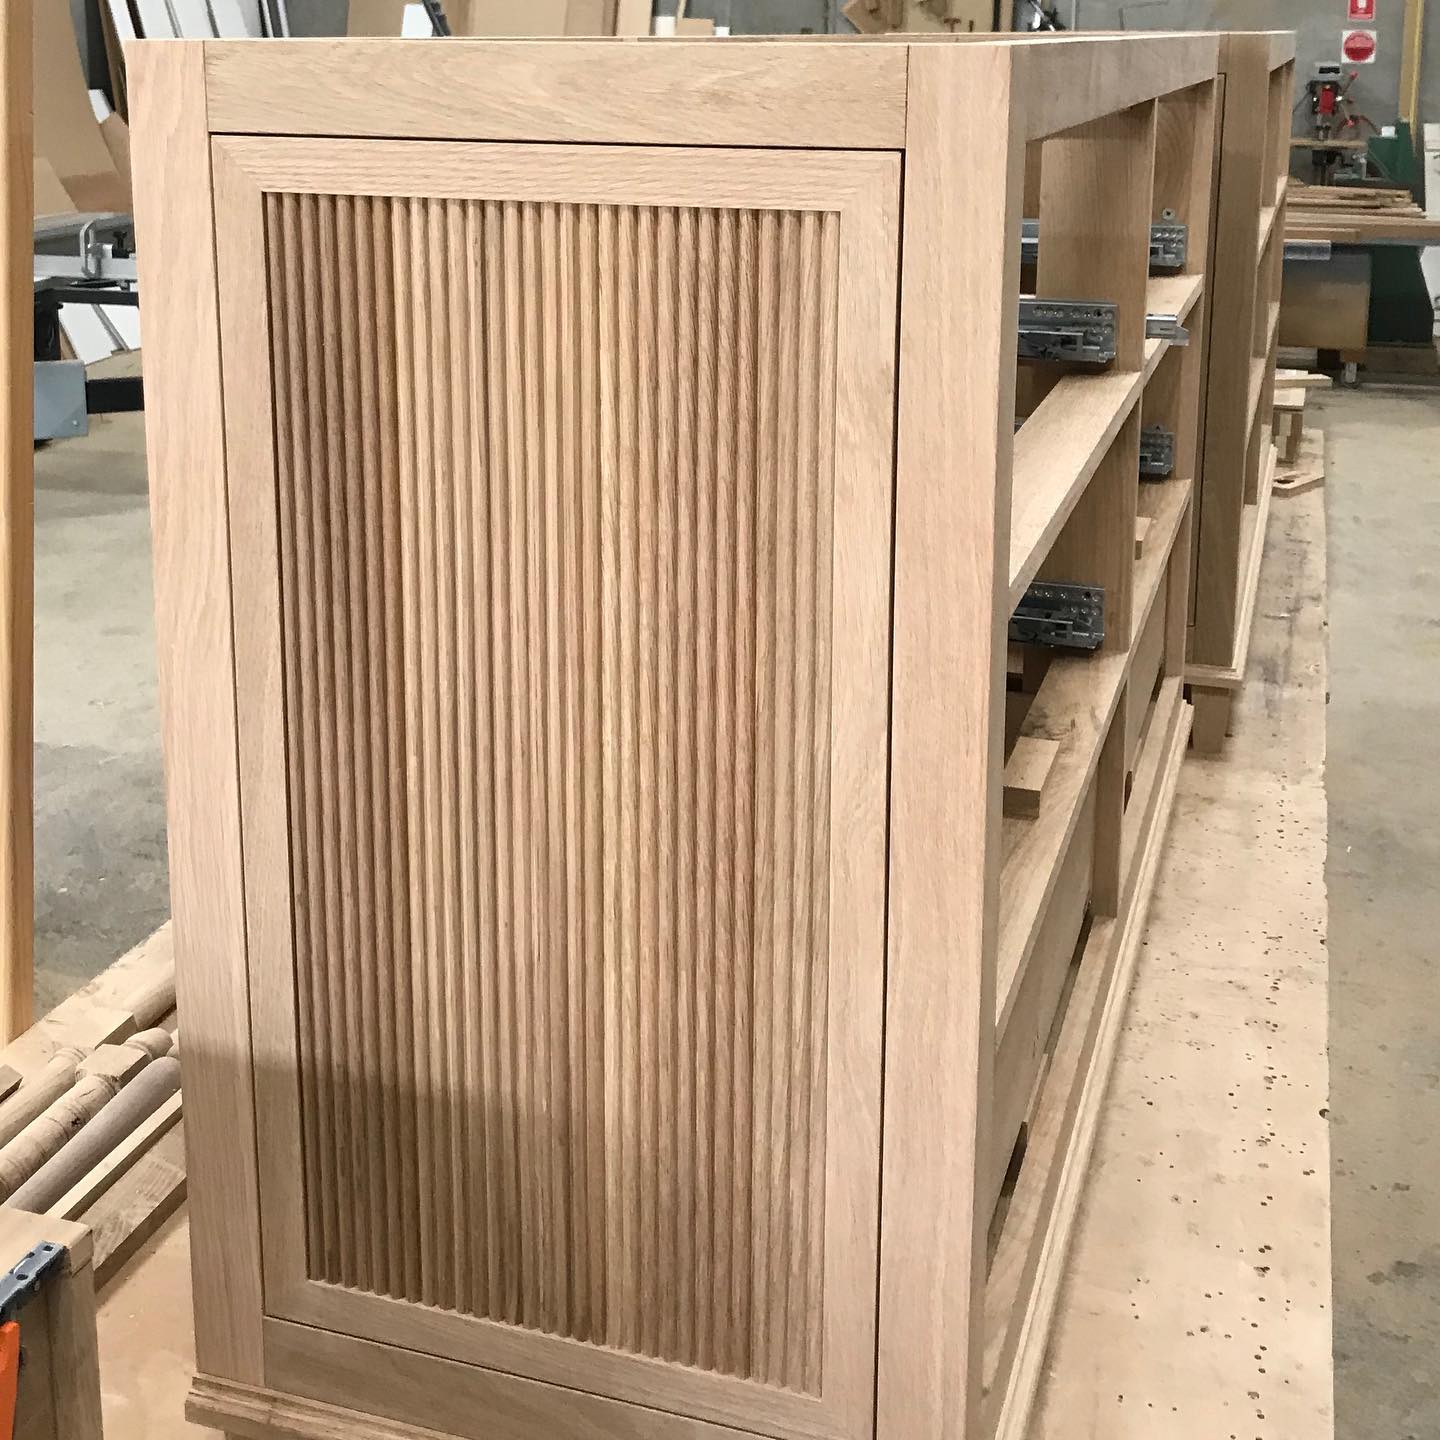 American Oak Dressers with mitred face frame. Frame constructed end panels and drawer fronts which feature a custom made reeded profile.  Also featuring solid timber dove tail drawer boxes, decorative trim around the base of the unit and tapered legs. 
.
.
.
.
.
.